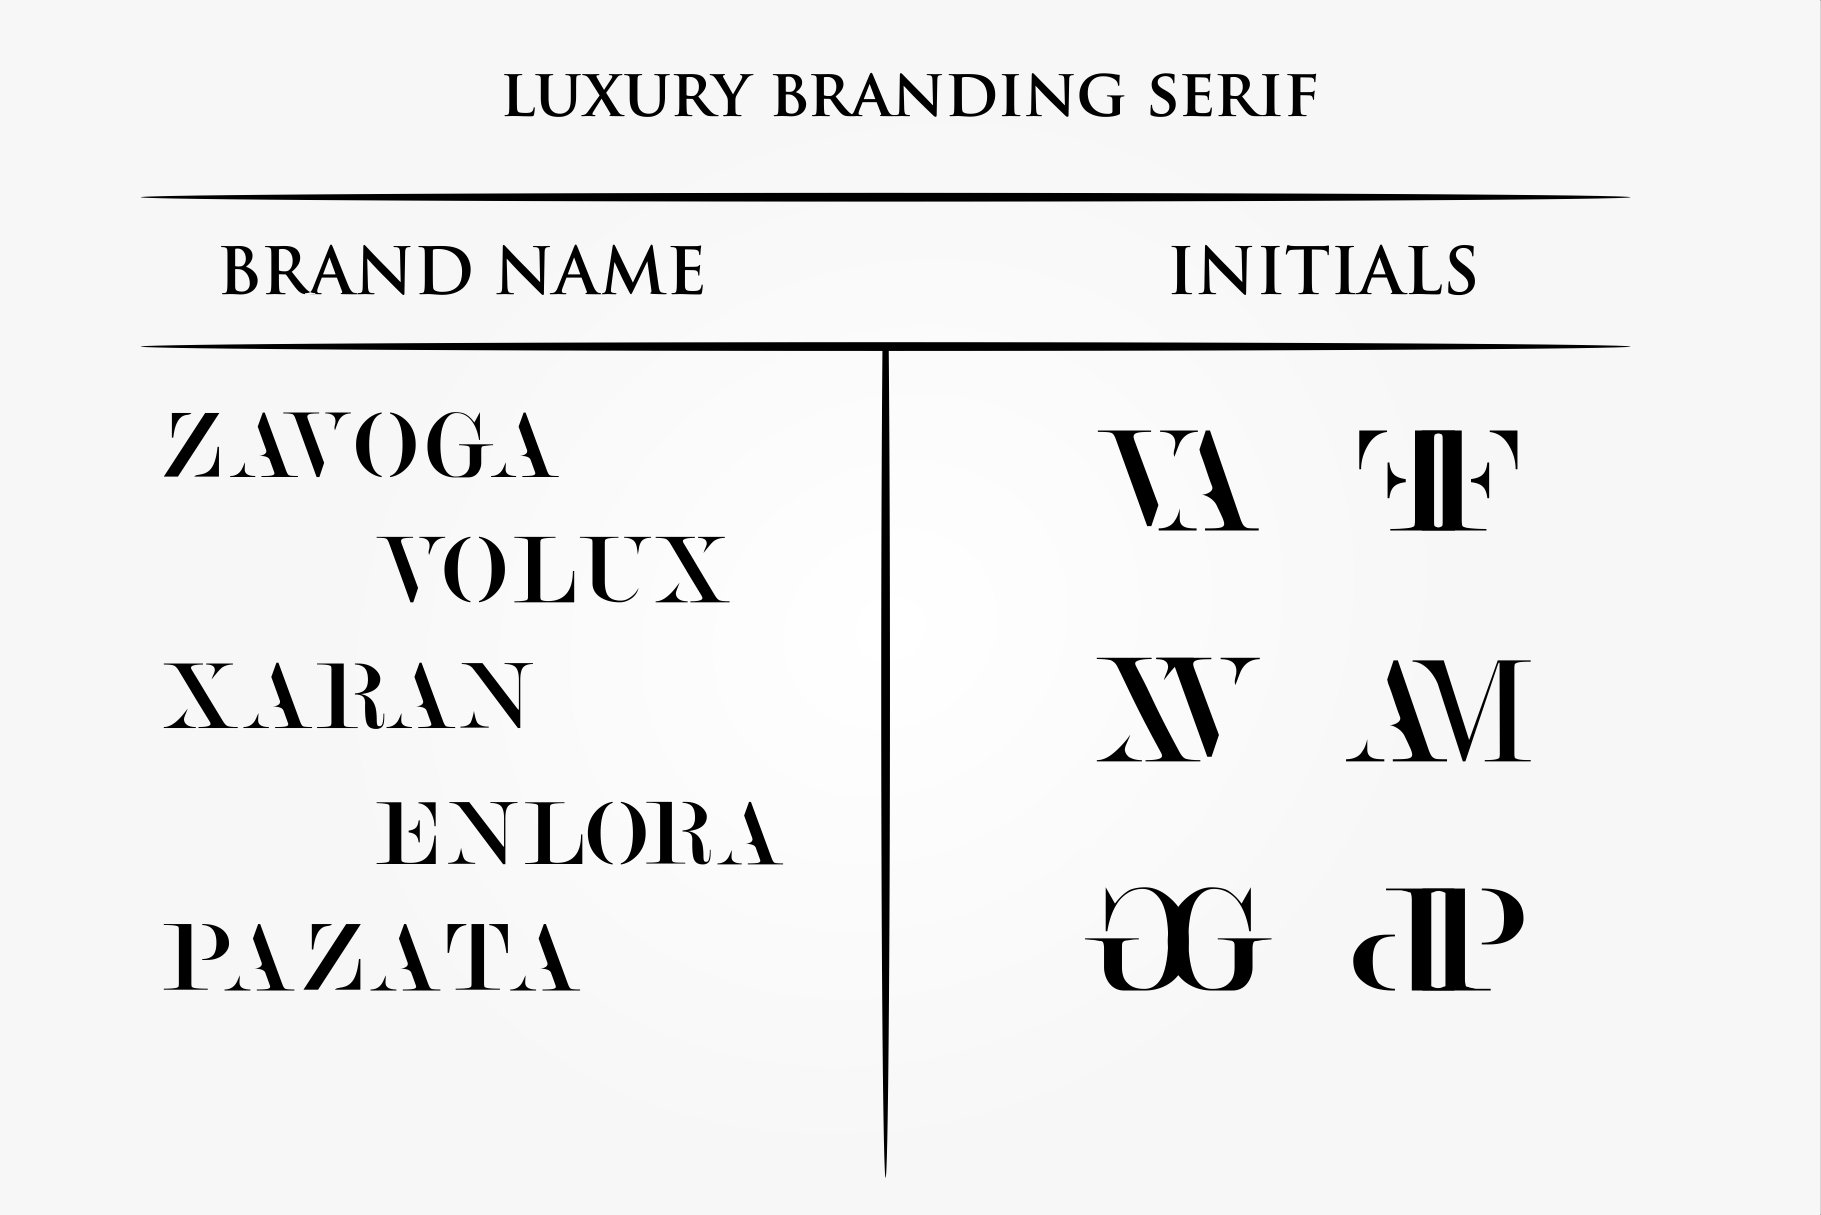 View of brand name by VOLUX font.